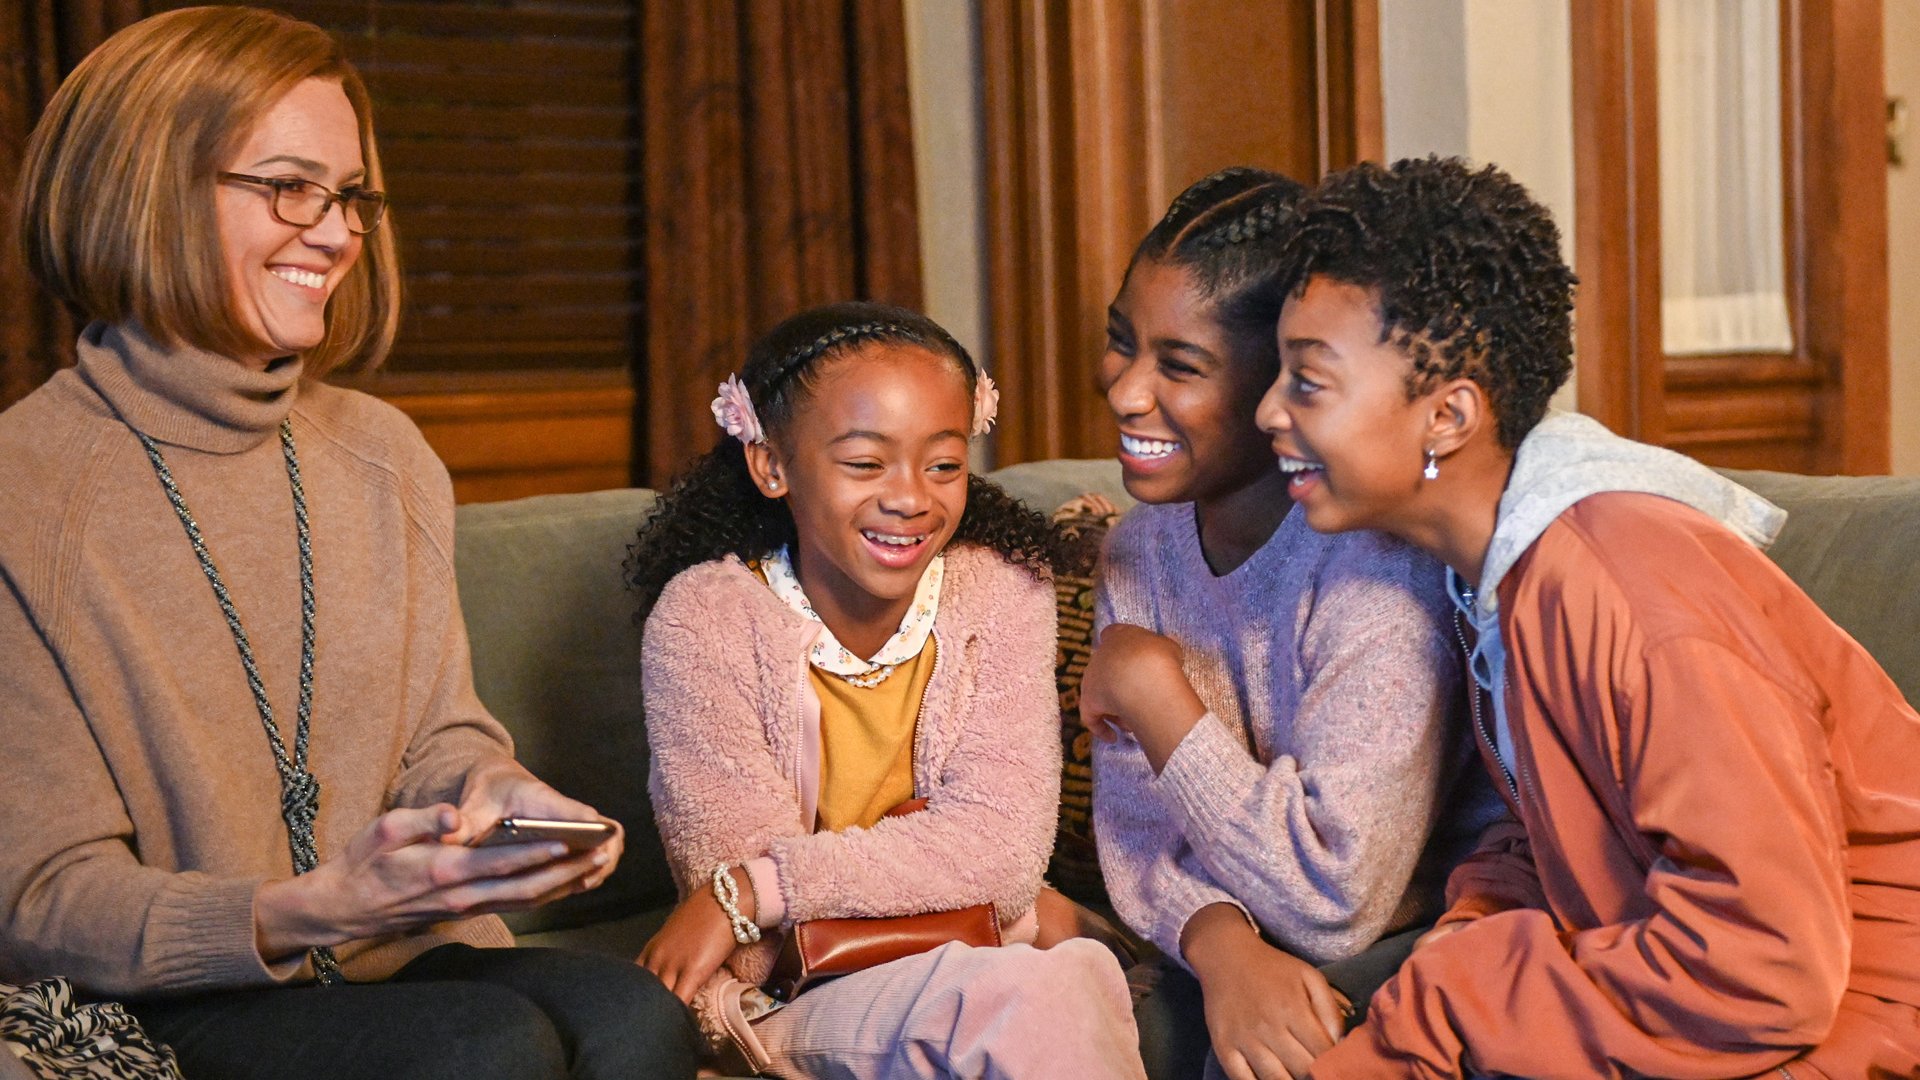 Mandy Moore as Rebecca, Faithe Herman as Annie, Lyric Ross as Deja, and Eris Baker as Tess on 'This Is Us' Season 4 Episode 8